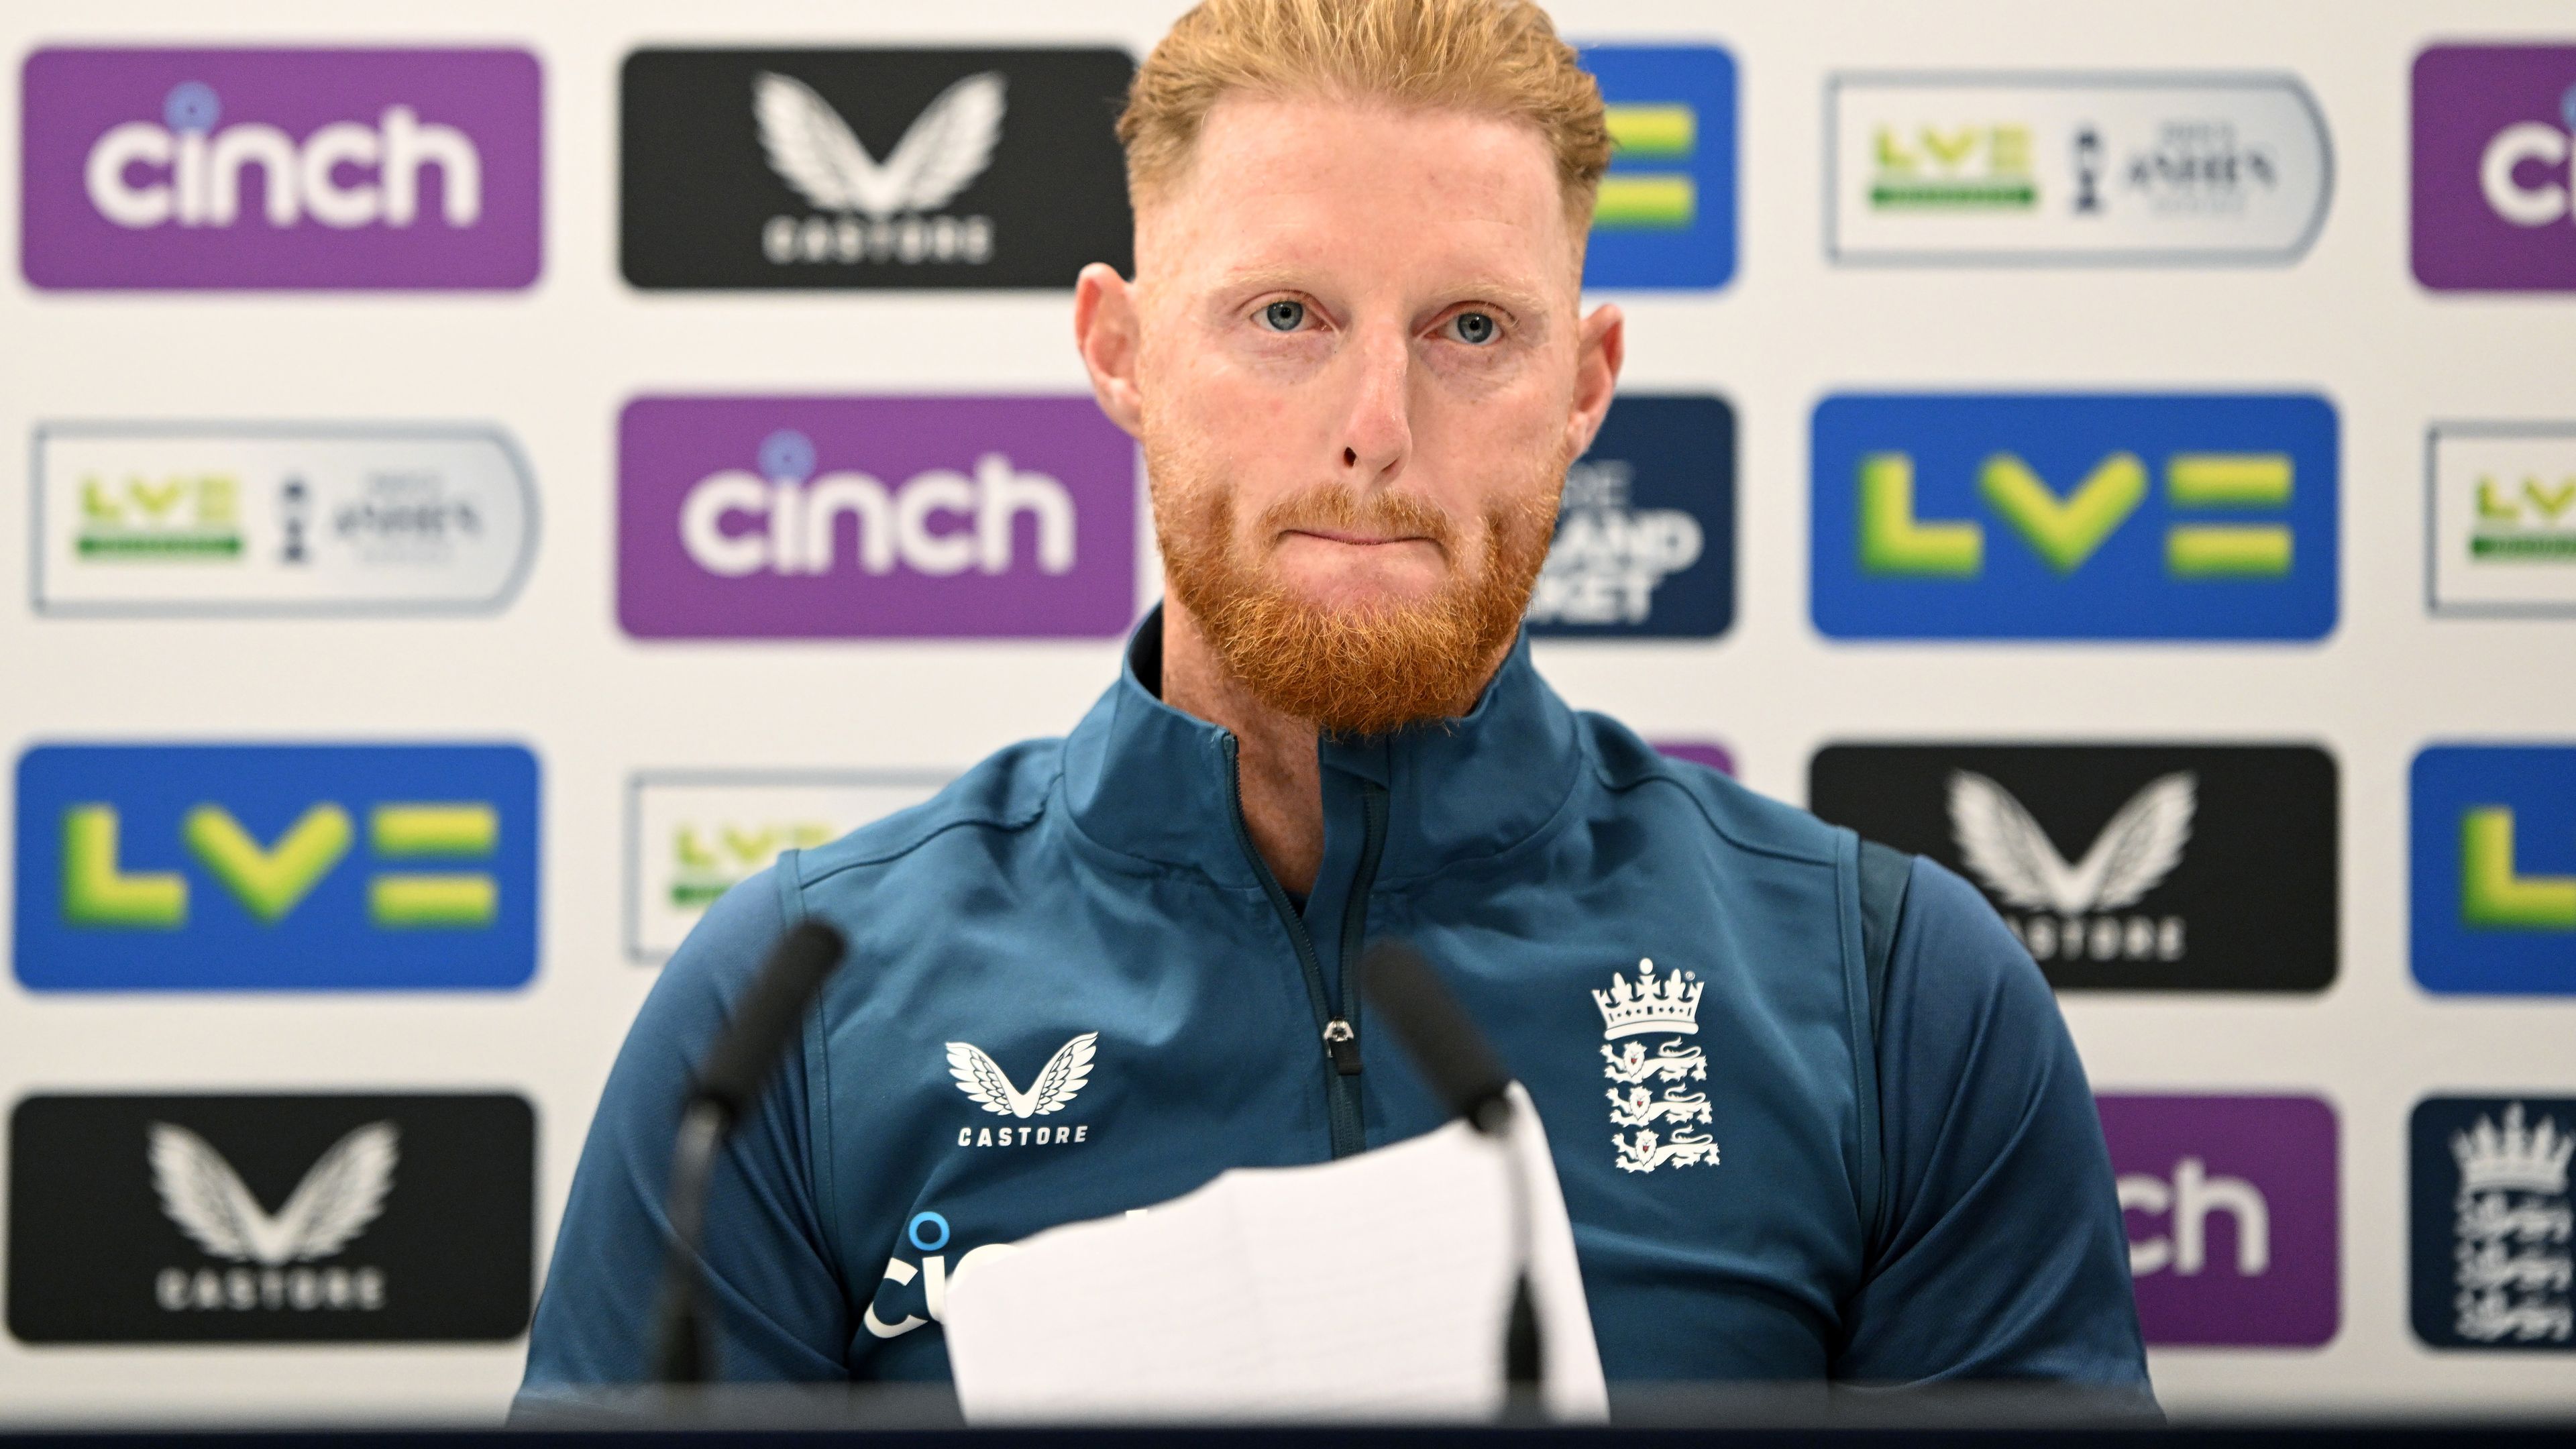 Ben Stokes 'deeply sorry' after Independent Commission for Equity in Cricket releases bombshell findings